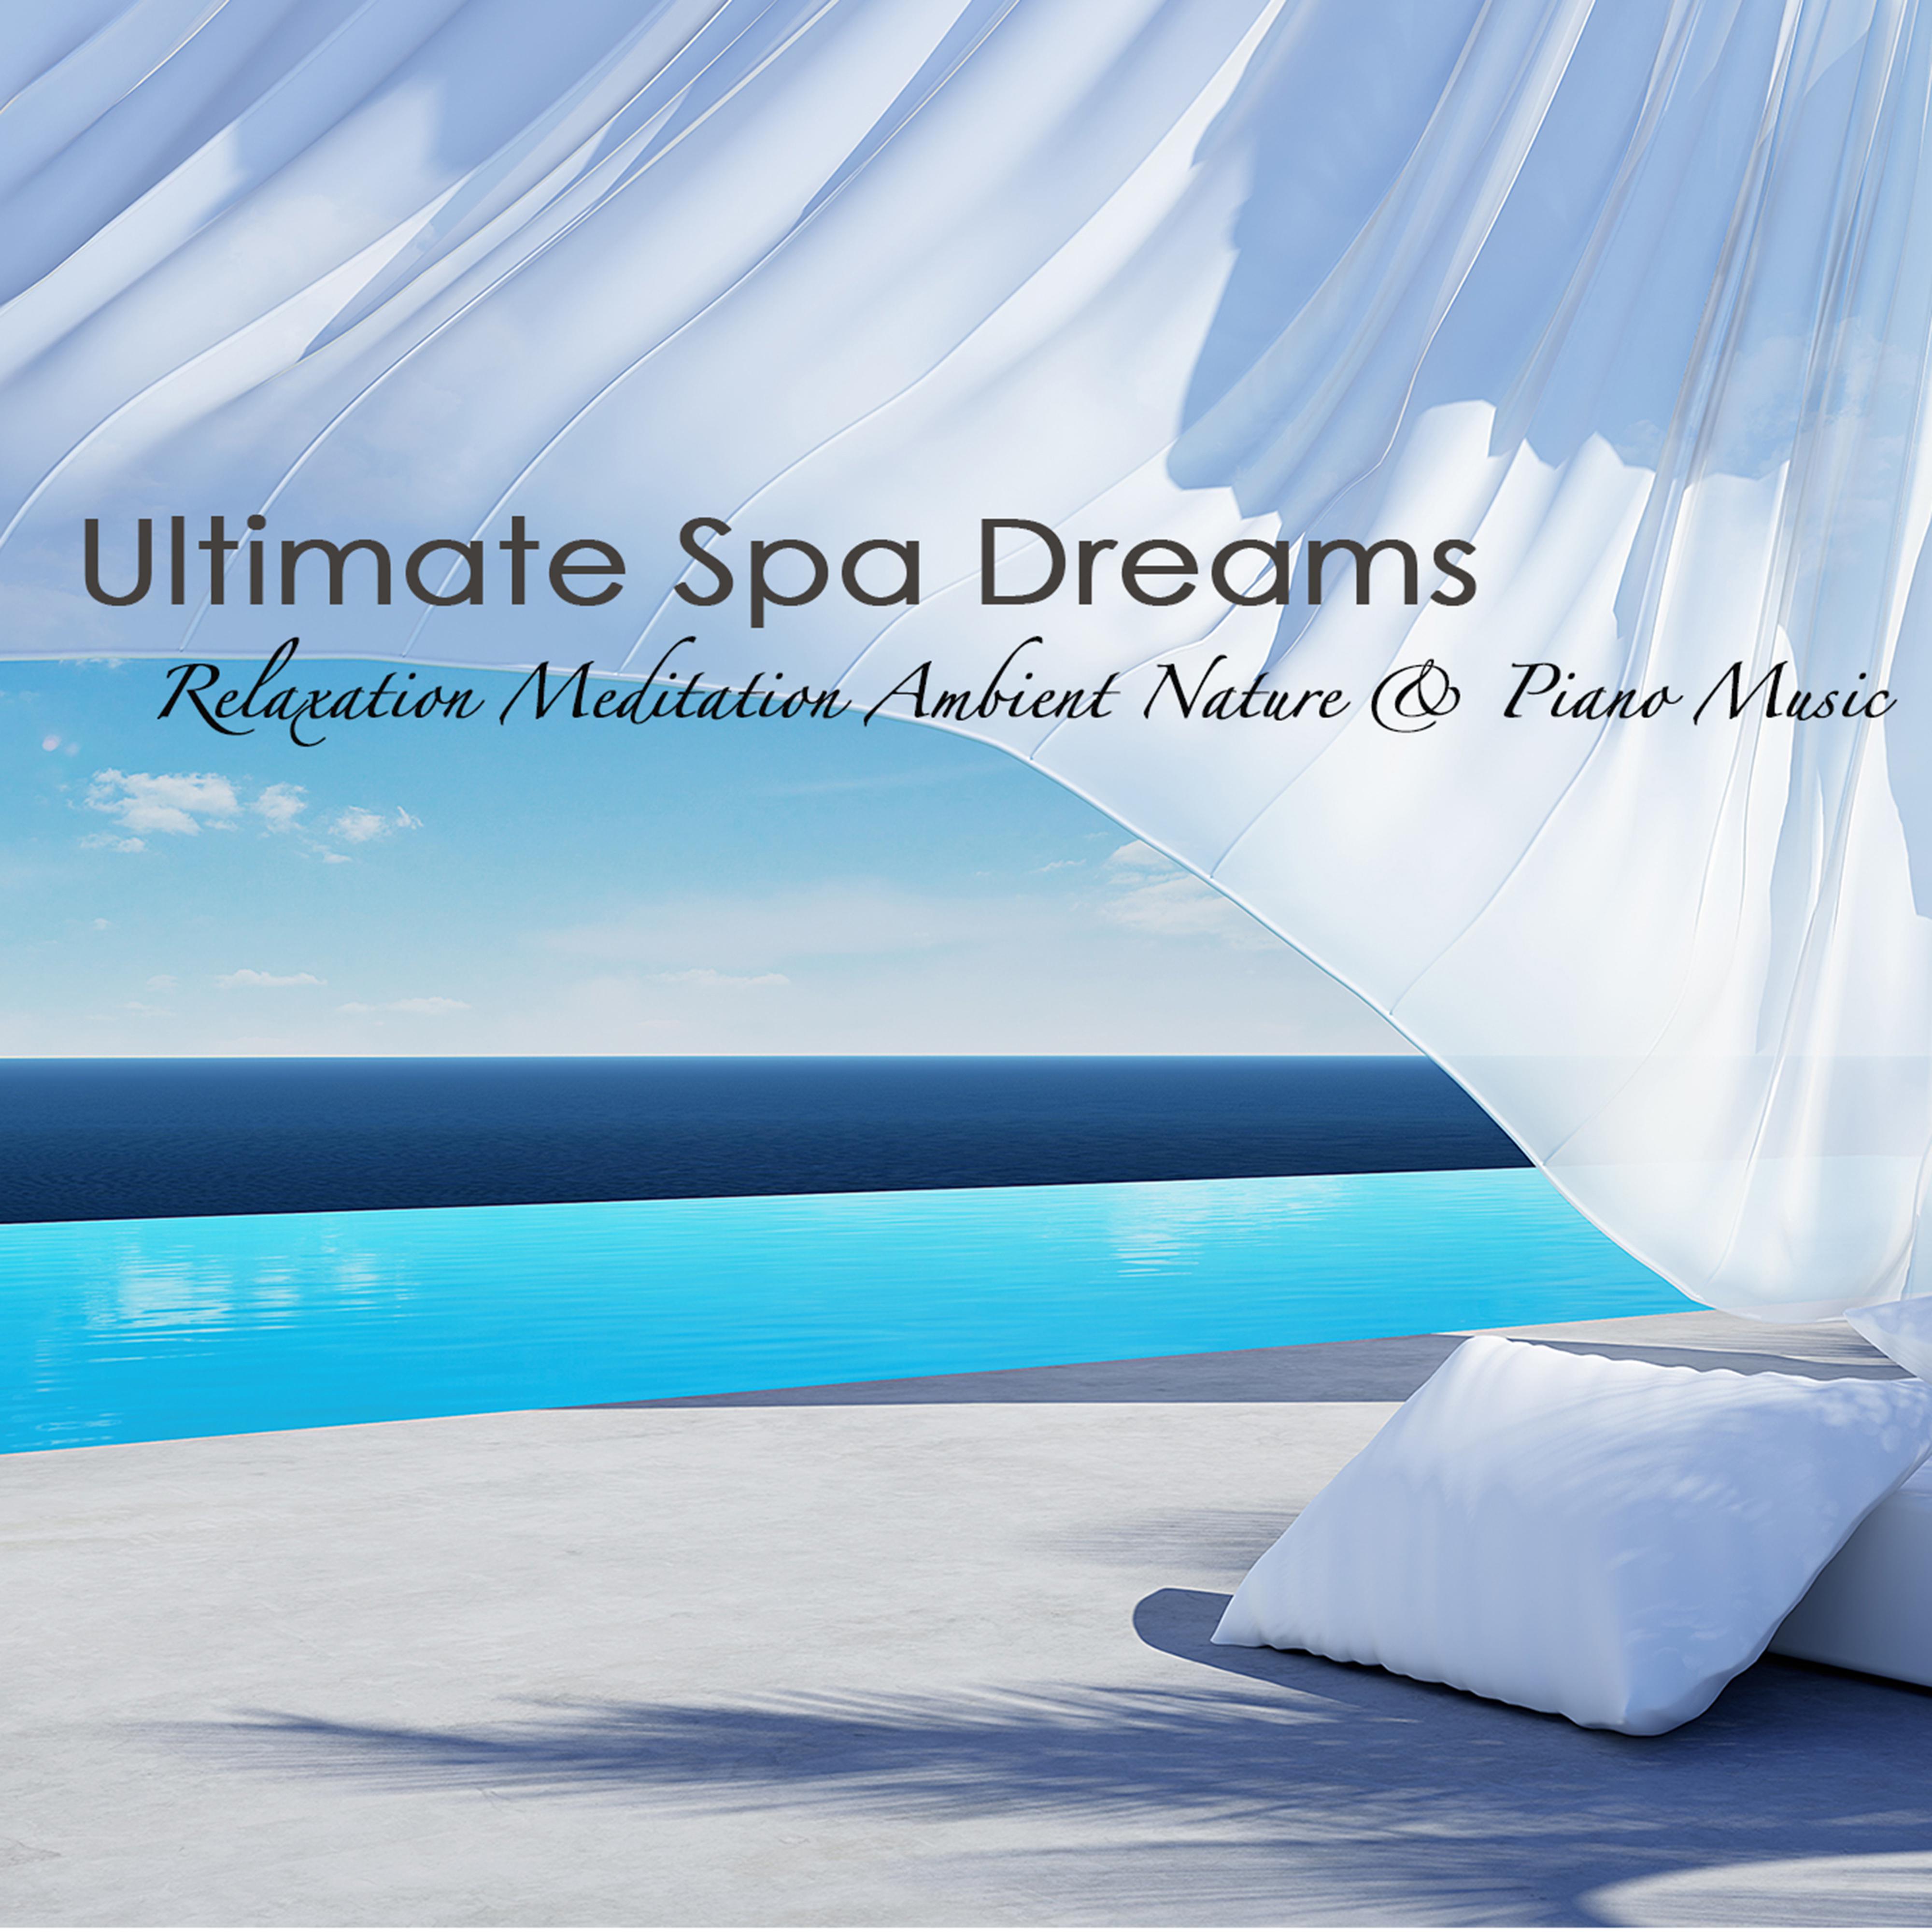 Ultimate Spa Dreams and Relaxation Meditation Ambient Nature & Piano Music 2014 Summer Edition